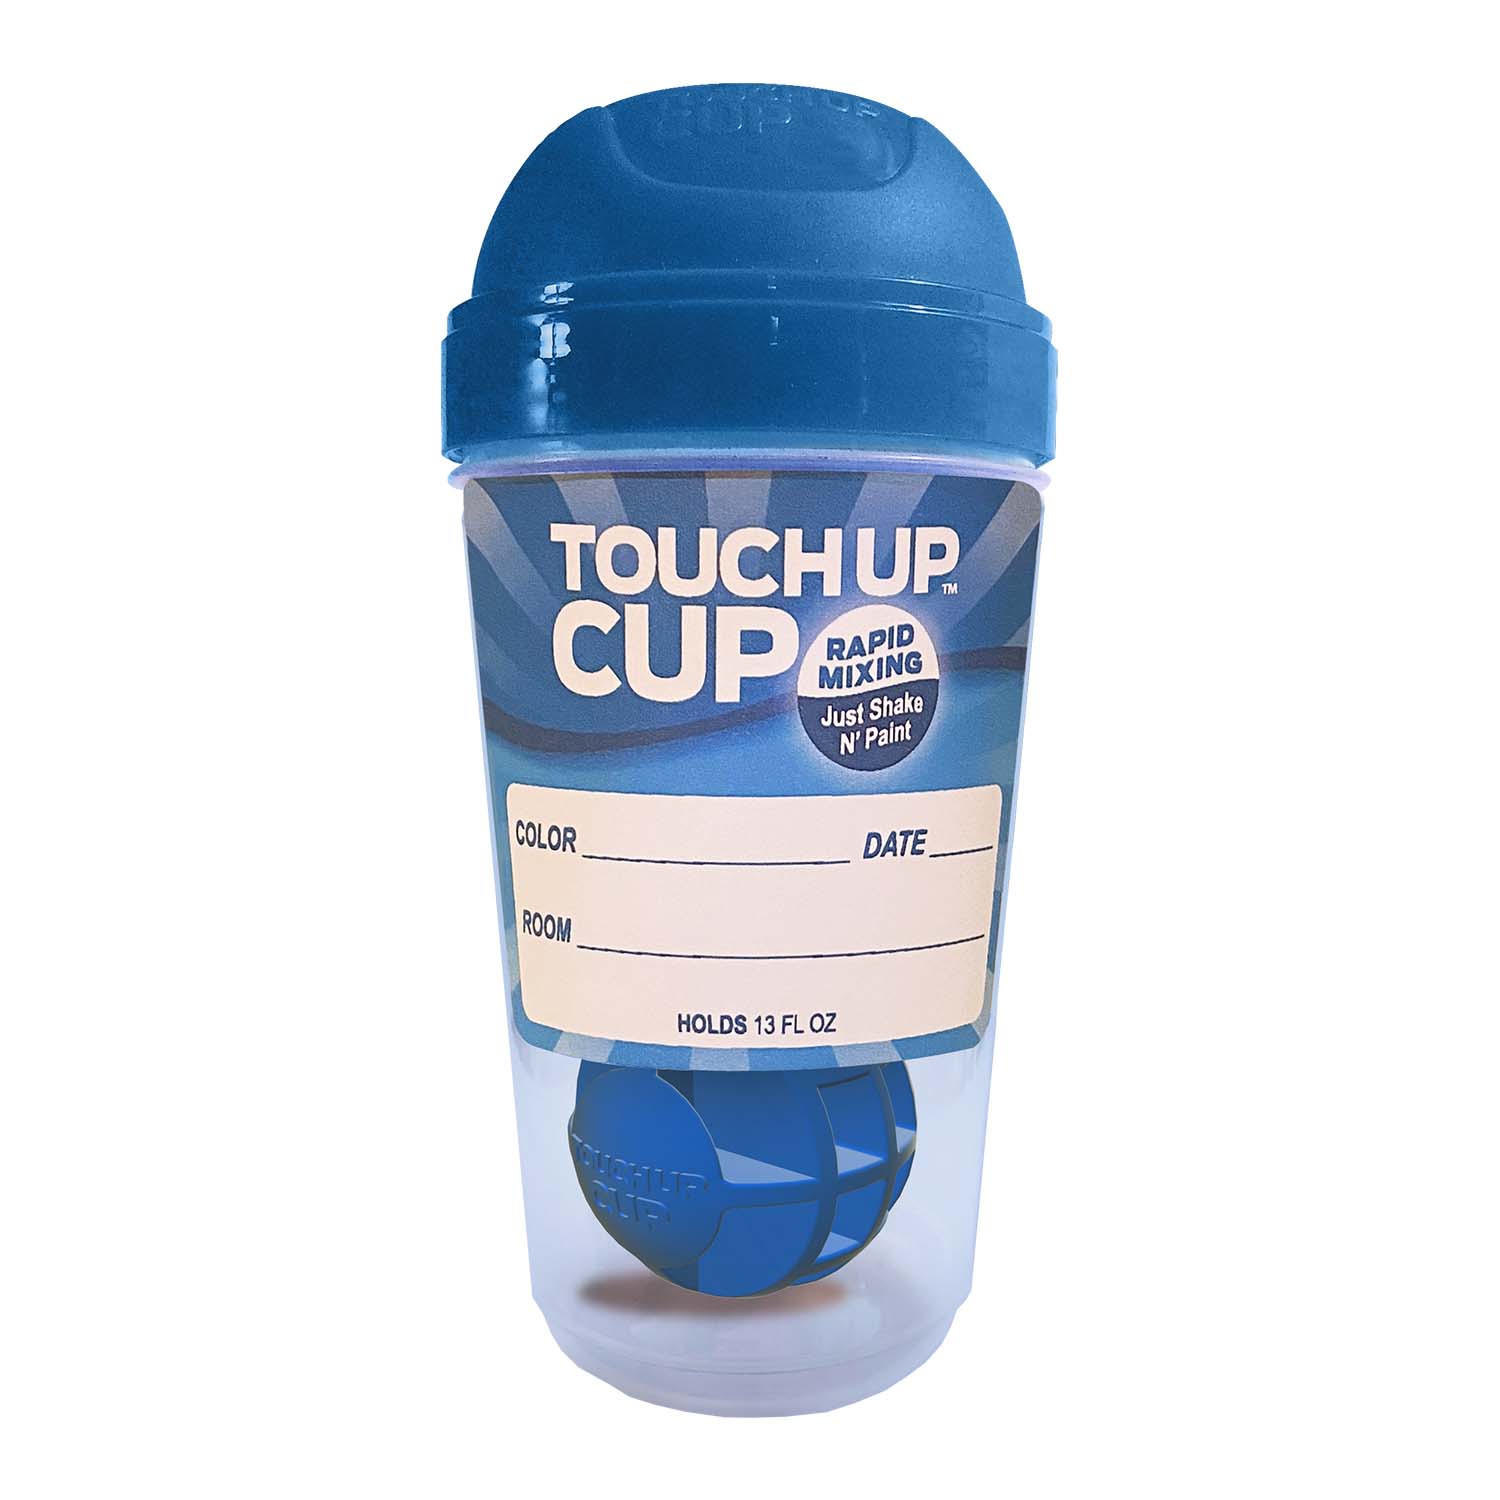 Touch Up™ Cup  Eight Pack - Just Shake N' Paint! – Touch Up Cup